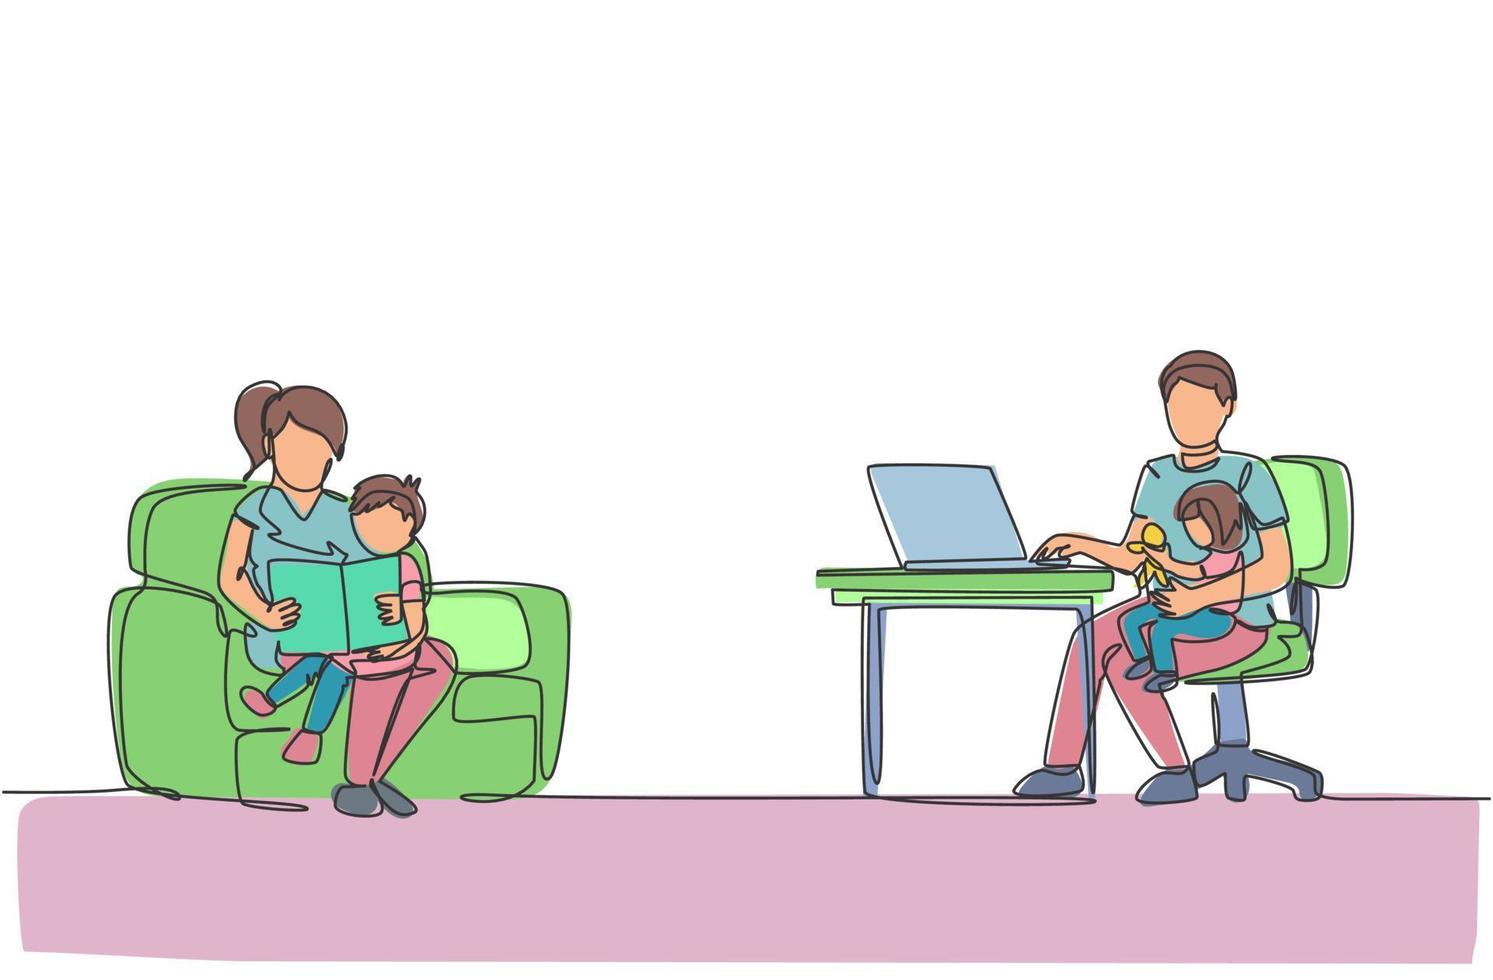 One single line drawing of young mom reading book to son and dad sitting on sofa and typing on laptop at home vector illustration. Happy family parenting concept. Modern continuous line draw design